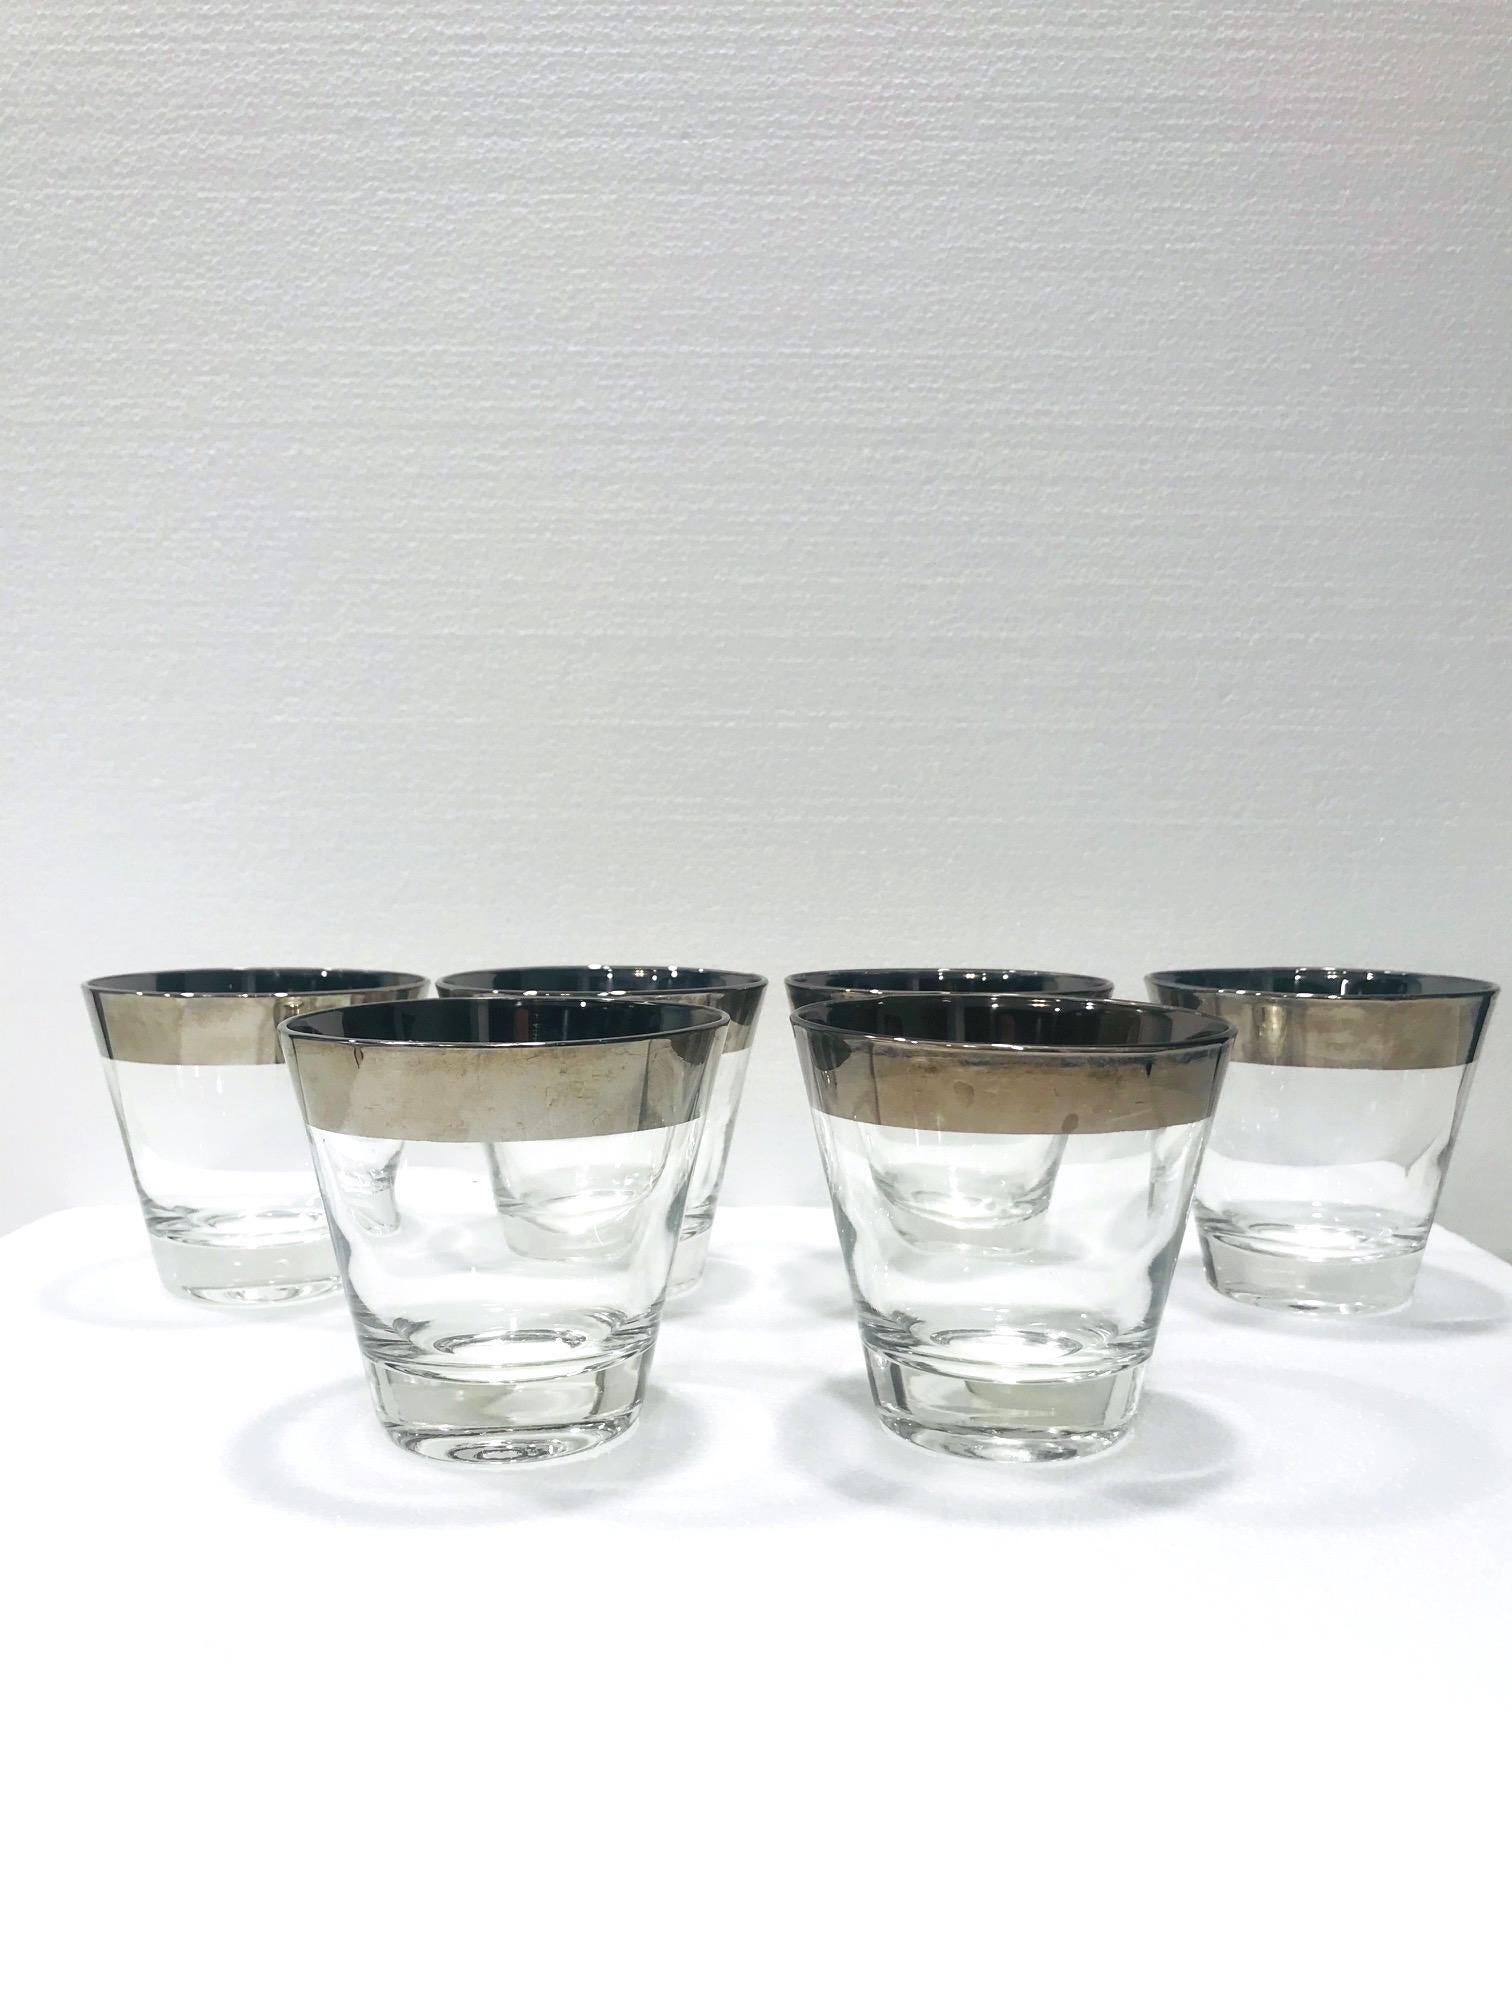 Mid-20th Century Set of Six Barware Glasses with Silver Overlay by Dorothy Thorpe, circa 1960